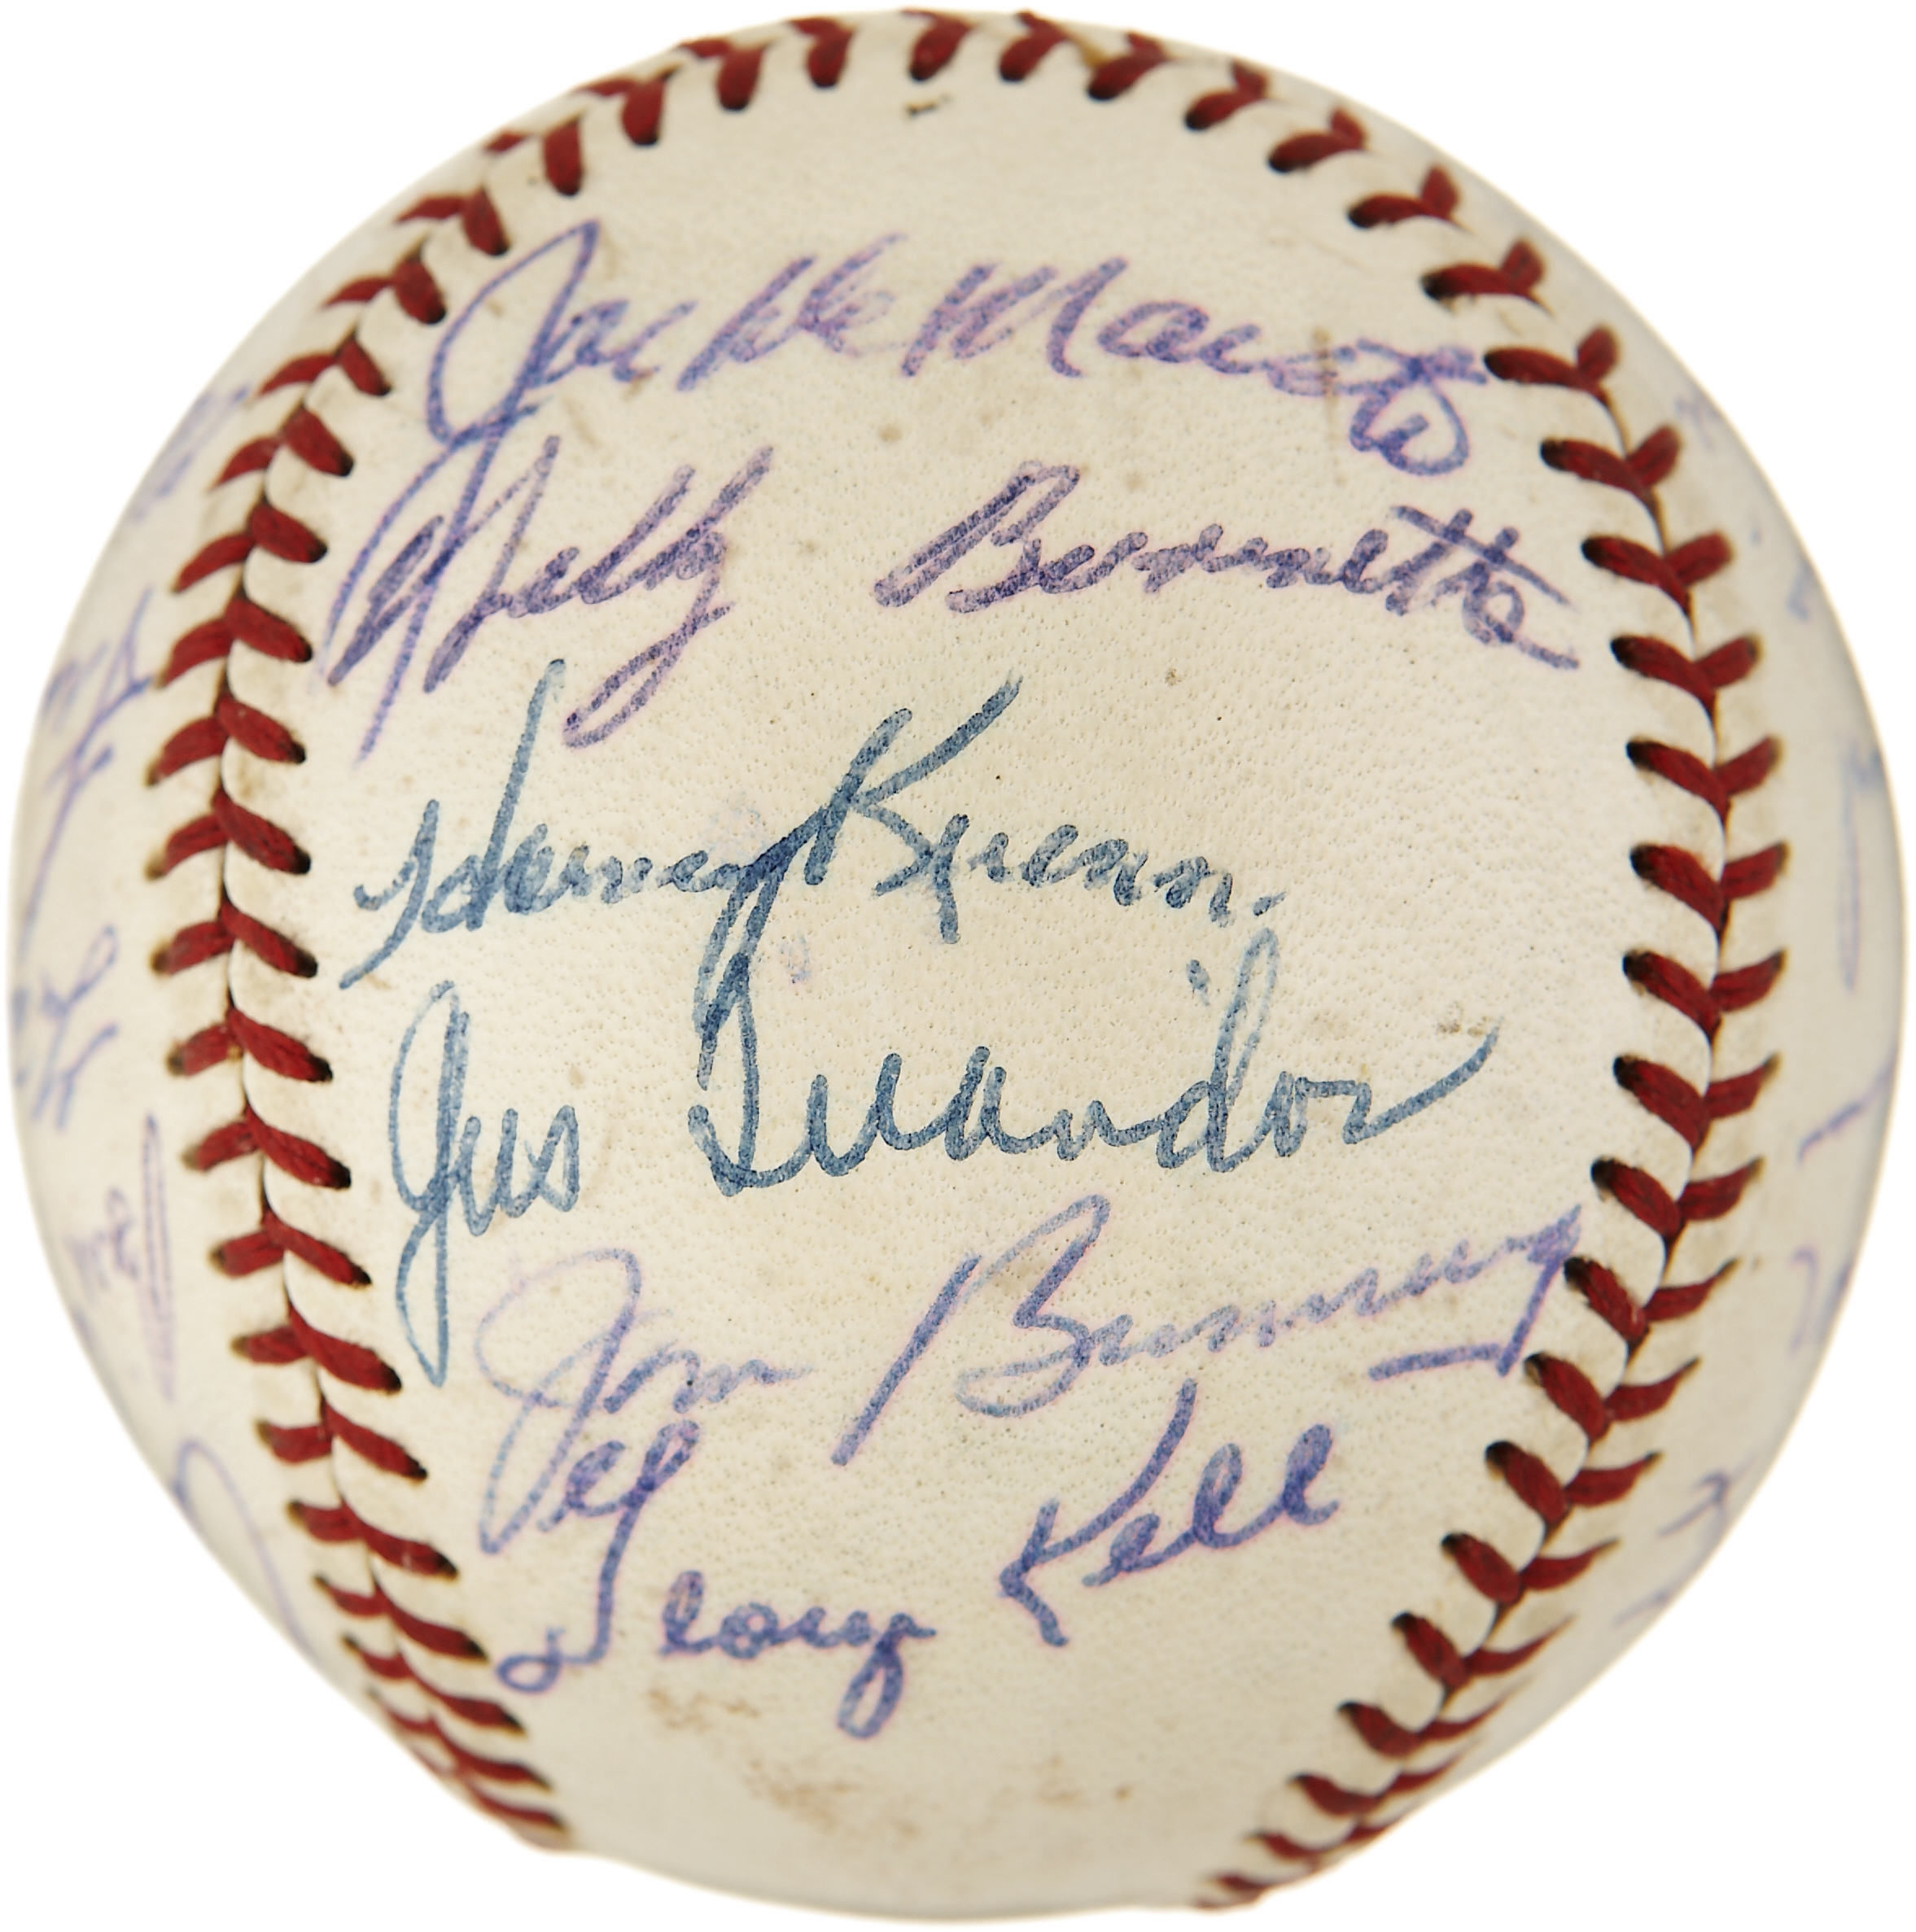 1957 MLB All Star National League Autographed Baseball (Signed by the American League Squad)